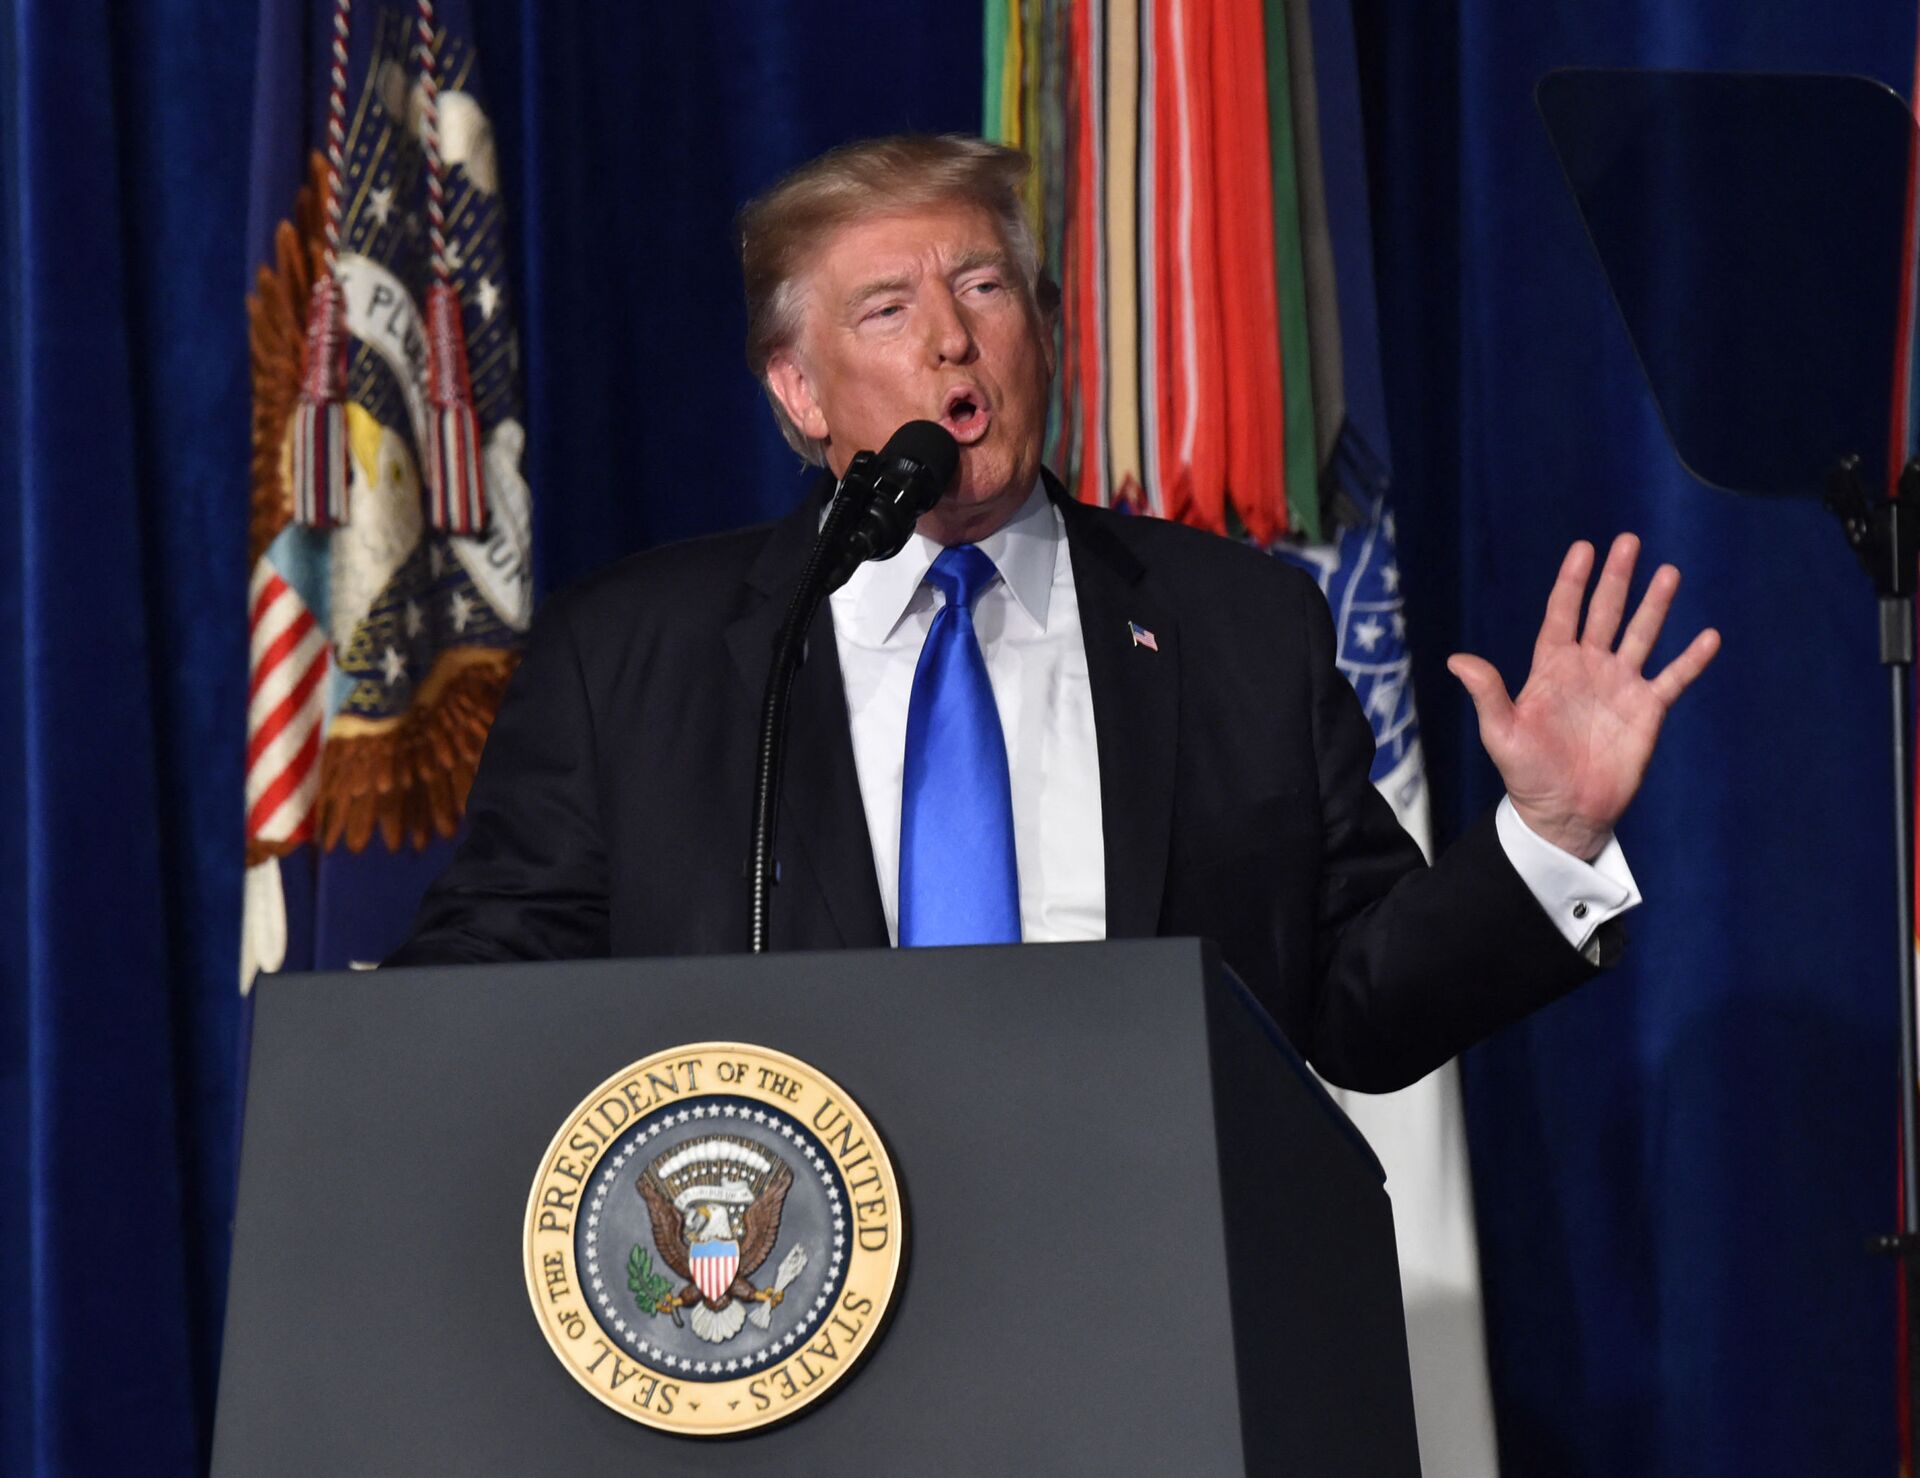 US President Donald Trump speaks during his address to the nation from Joint Base Myer-Henderson Hall in Arlington, Virginia, on August 21, 2017. - Trump Monday left the door open to a possible political agreement with the Taliban, in an address to the nation on America's strategy in the 16-year Afghan conflict. Some day, after an effective military effort, perhaps it will be possible to have a political sentiment that includes elements of the Taliban in Afghanistan, he said. - Sputnik International, 1920, 07.09.2021